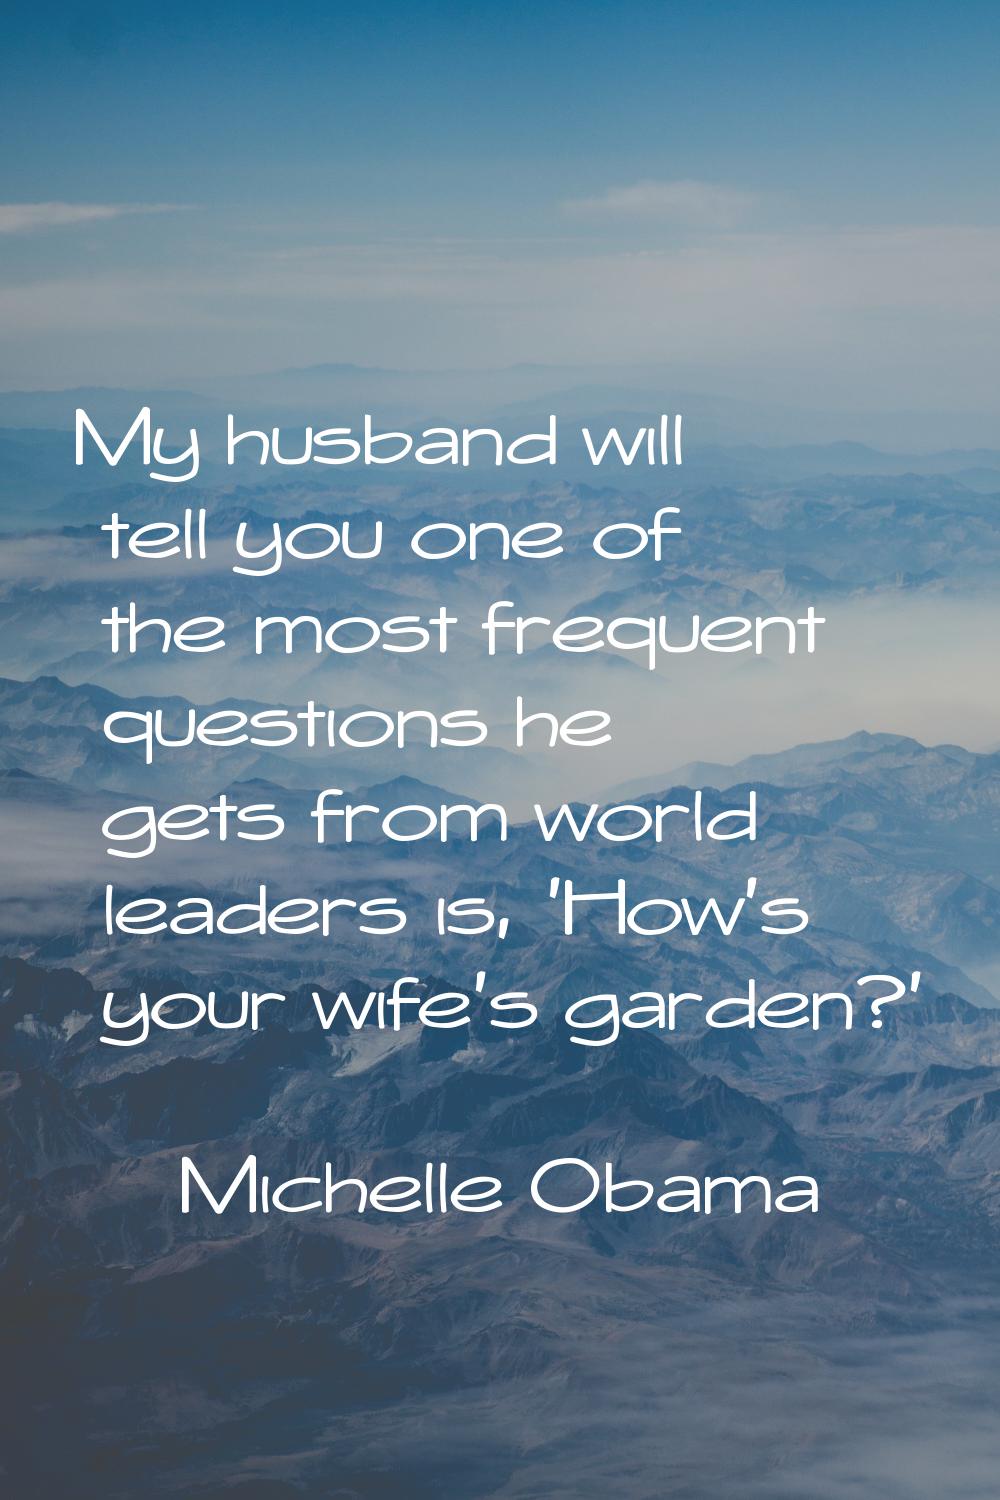 My husband will tell you one of the most frequent questions he gets from world leaders is, 'How's y